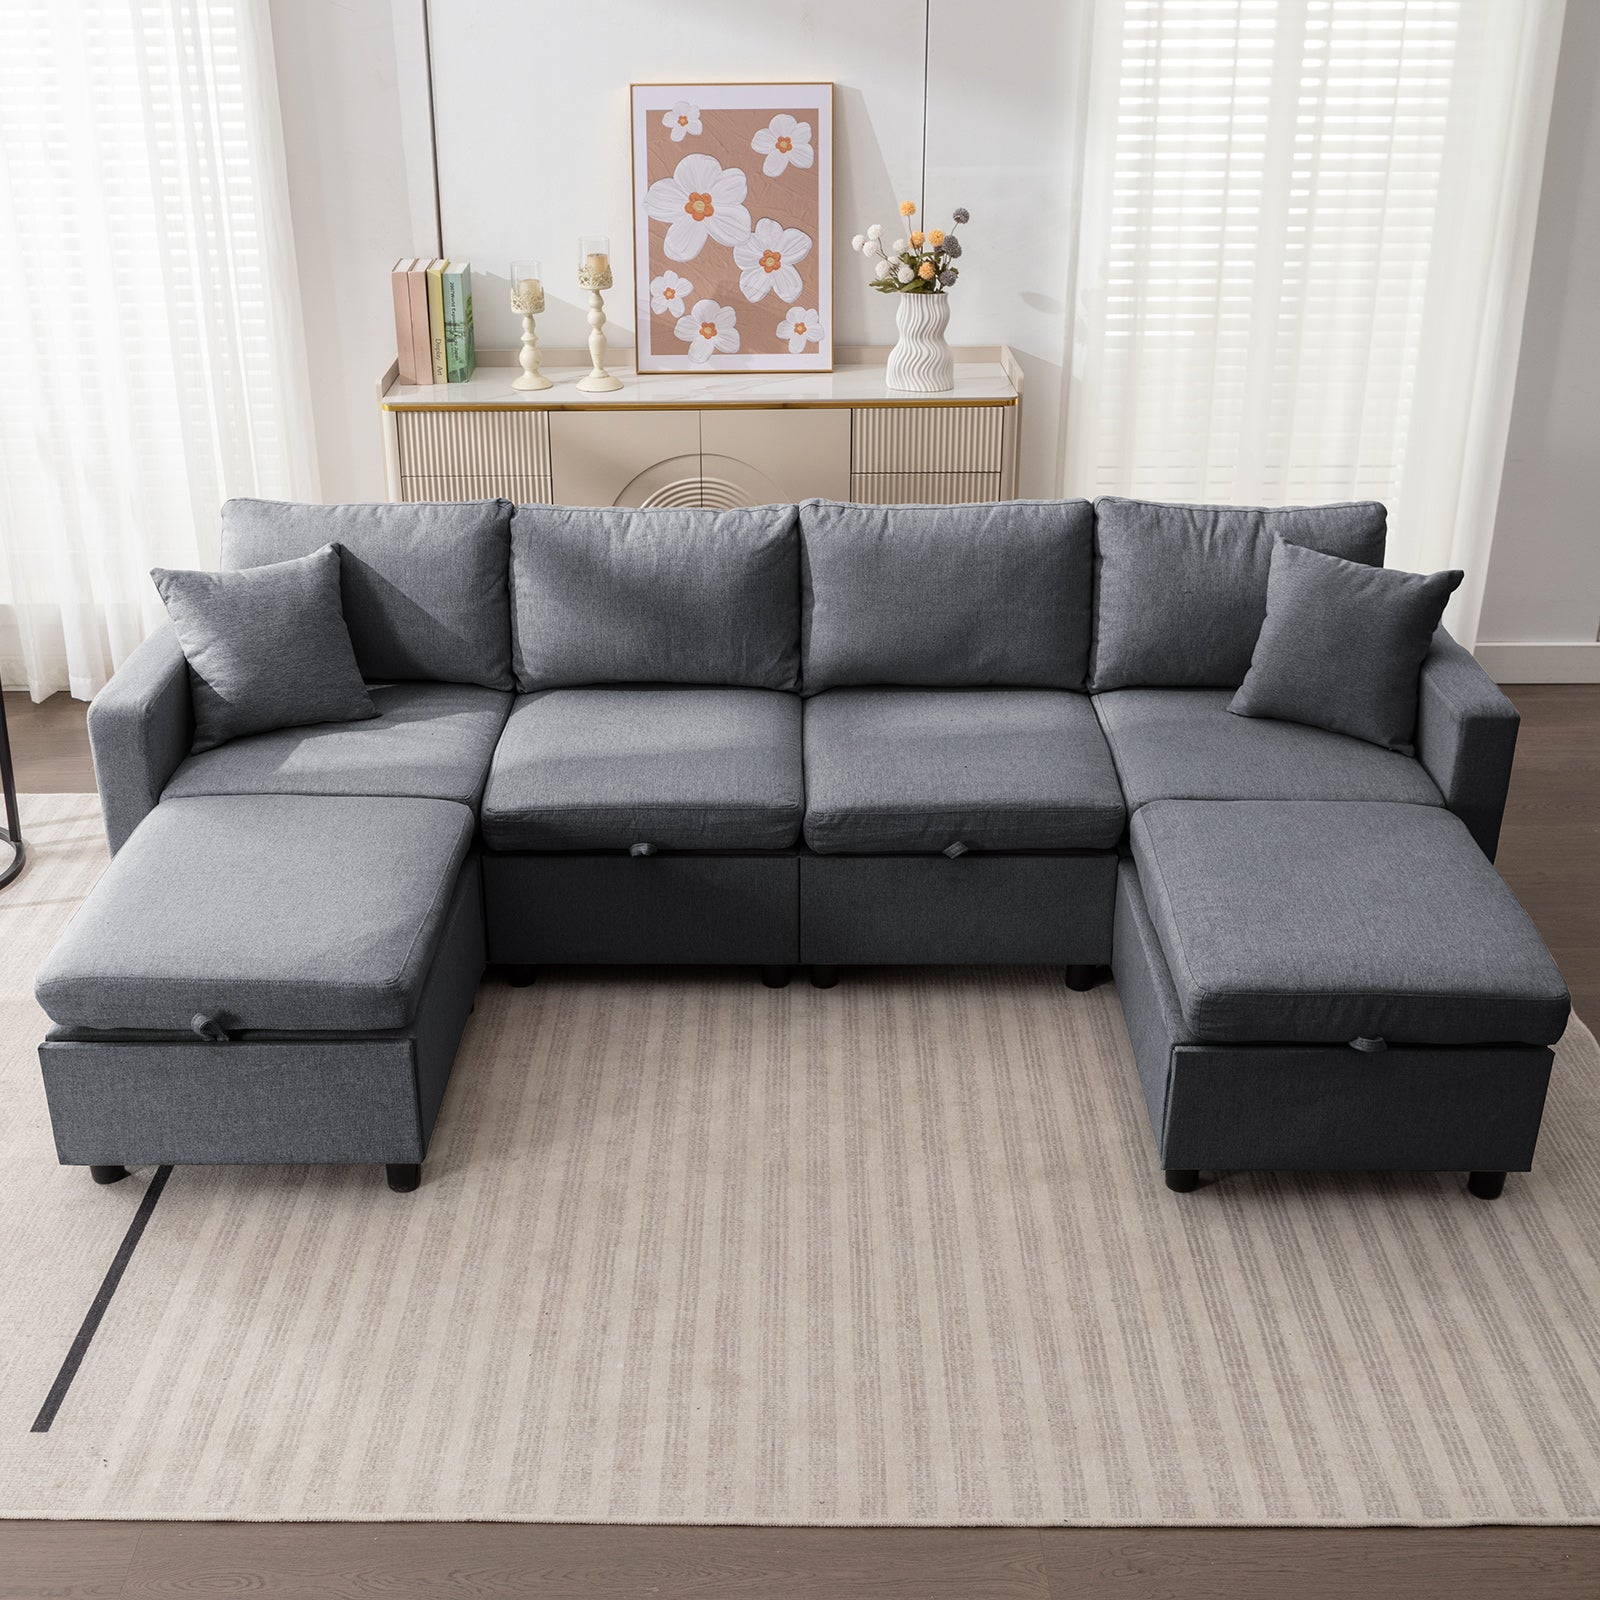 Mjkone Sectional Sofa Couch for Living Room, Modern Seat Couches/ Storage Space/Memory Foam Cushions/Linen Fabric/Soft Sponge Seaters/Easy Assembly